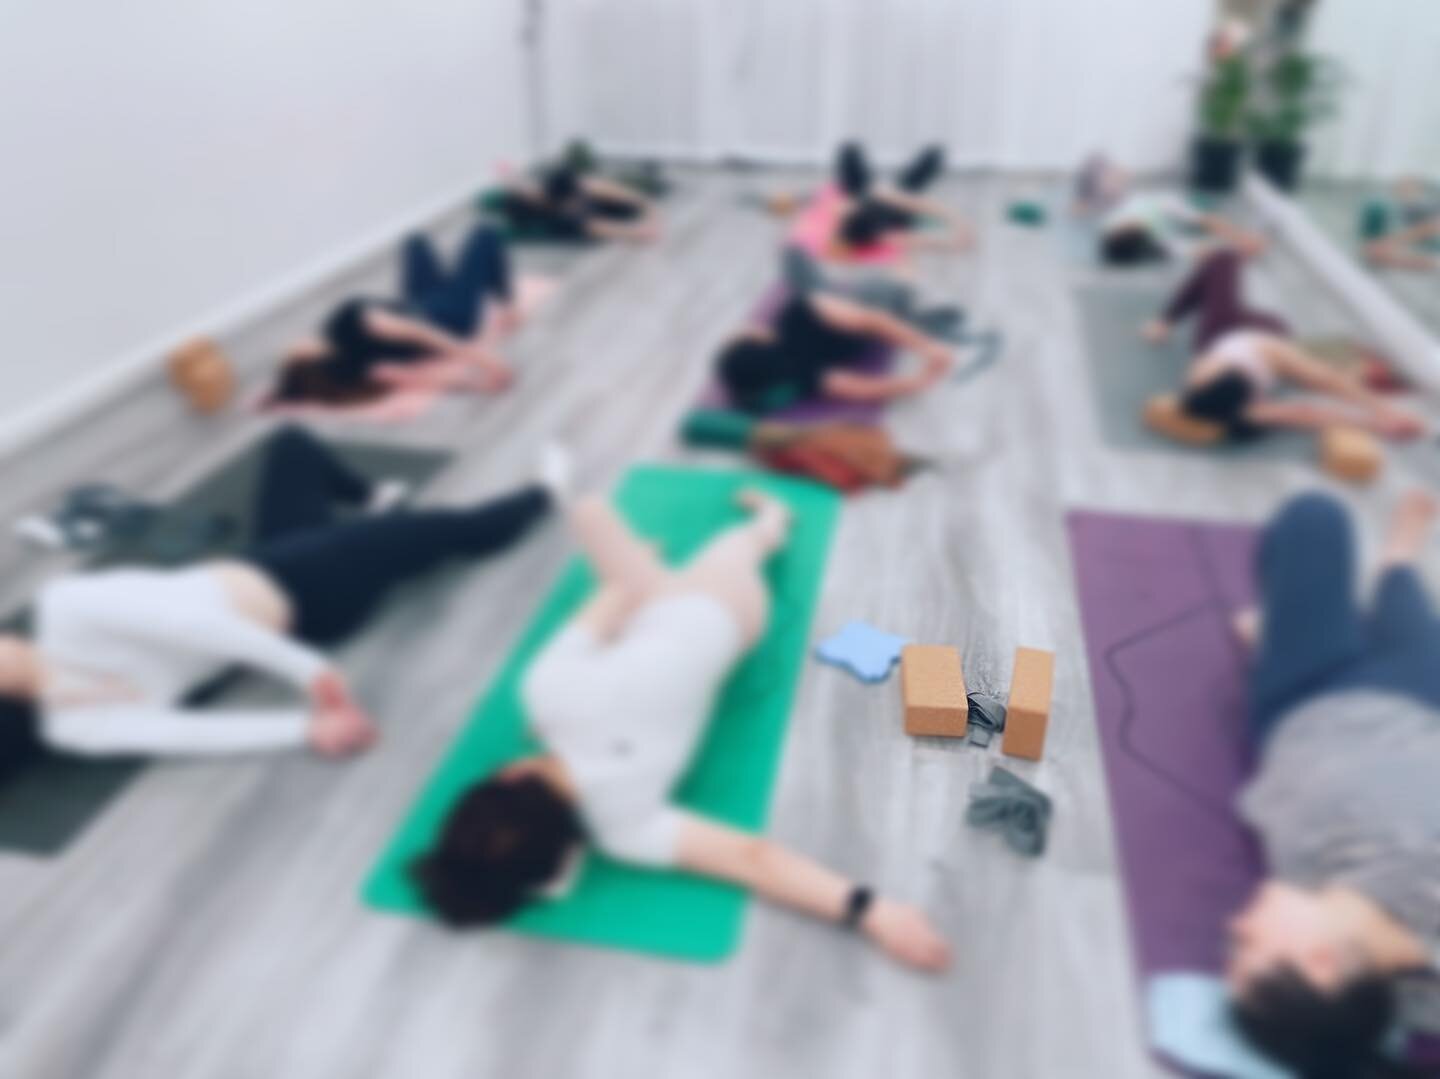 Love this wed 7pm yoga with @tenya.w 🧚 shoulder and hip-opening 💗

1. Increases range of motion in shoulders and hips.
2. Reduces pain and stiffness.
3. Improves posture.
4. Enhances athletic performance.
5. Promotes relaxation and stress relief.

